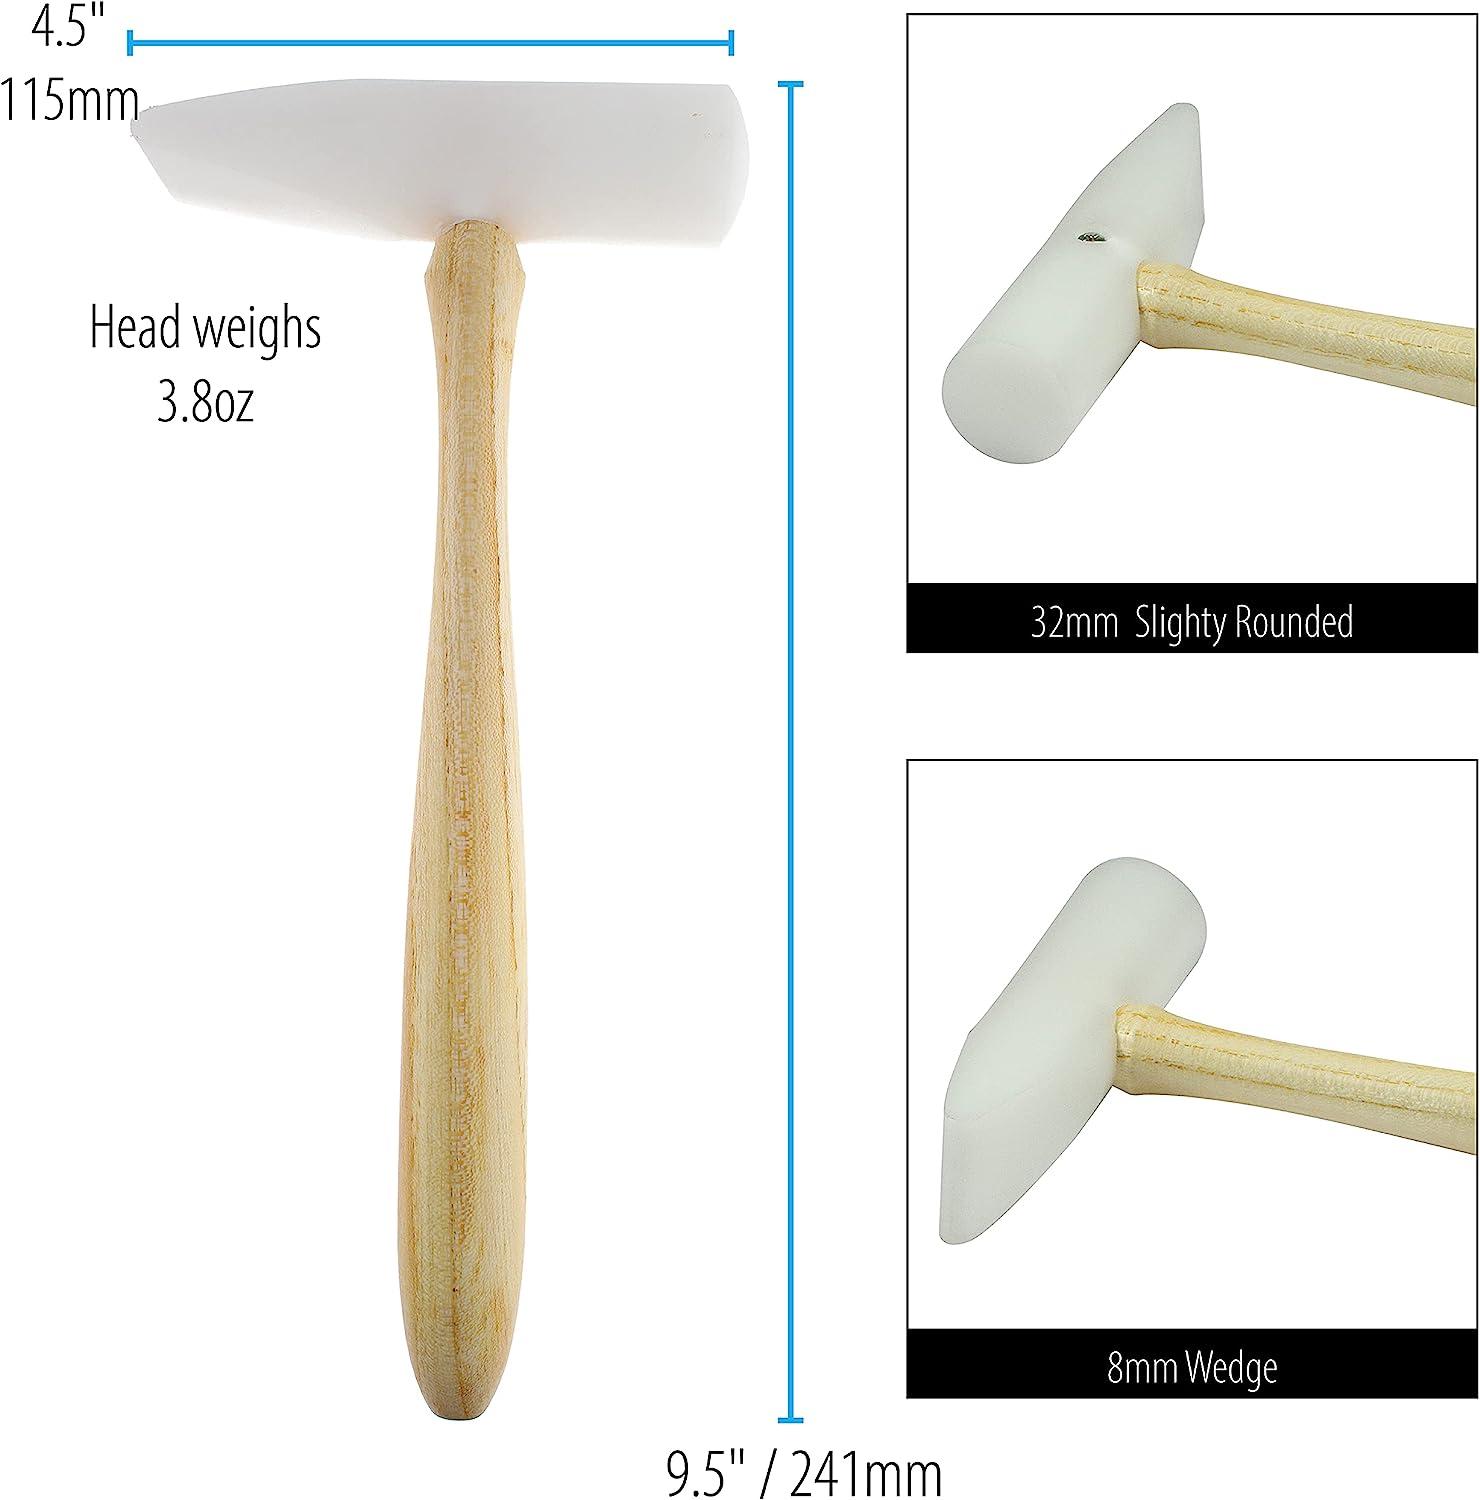 The Beadsmith Nylon Wedge Hammer - 9.5 inches Wooden Handle - 115mm, 3.8oz  Head, 8 & 32mm Faces - Use to Flatten and Shape Sheet Metal and Wire with  no Risk of marring